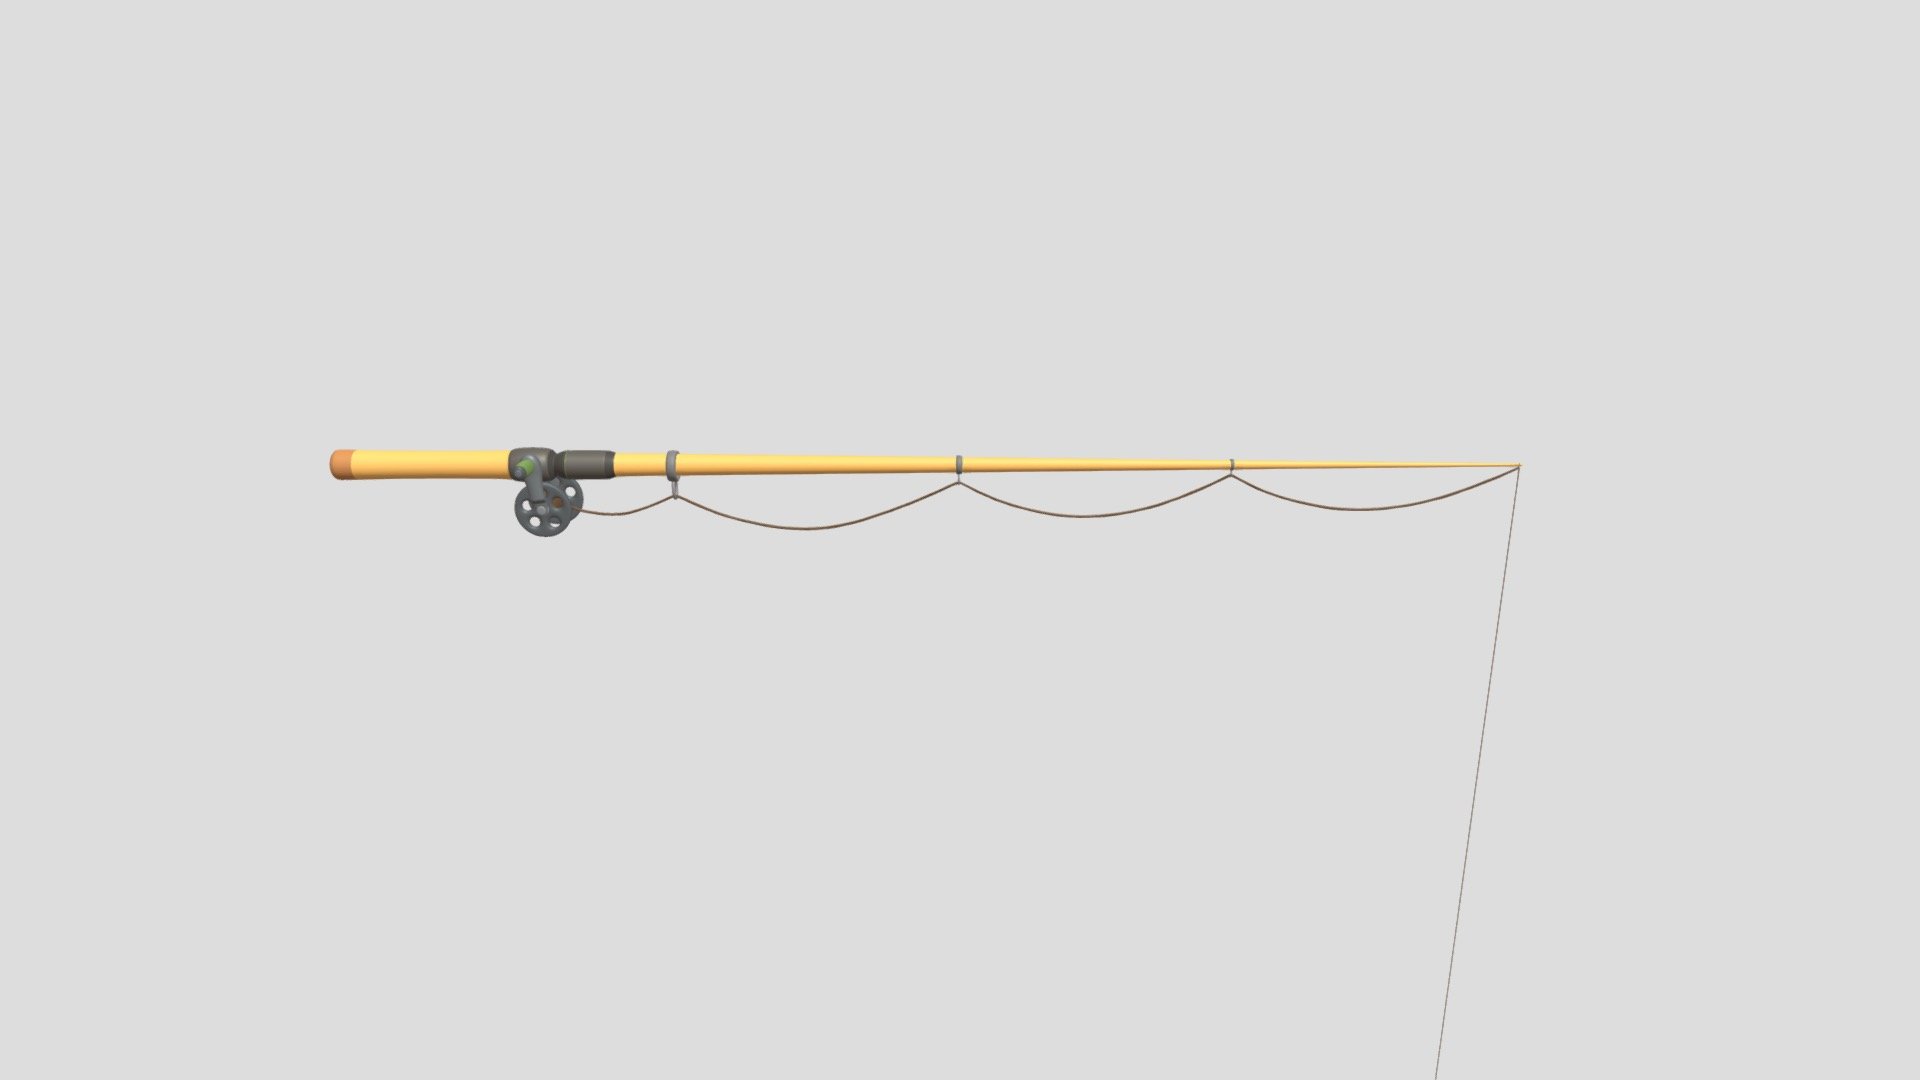 High Poly Rigged Fishing Pole

Subdivision: 1

Rigged (Check put picture with armature) Root is located on handle.

Textures: 1024 x 1024

Materials: 2 Pole; Metal

Formats: FBX; OBJ; X3D; STL

I hope you enjoy the model 3d model